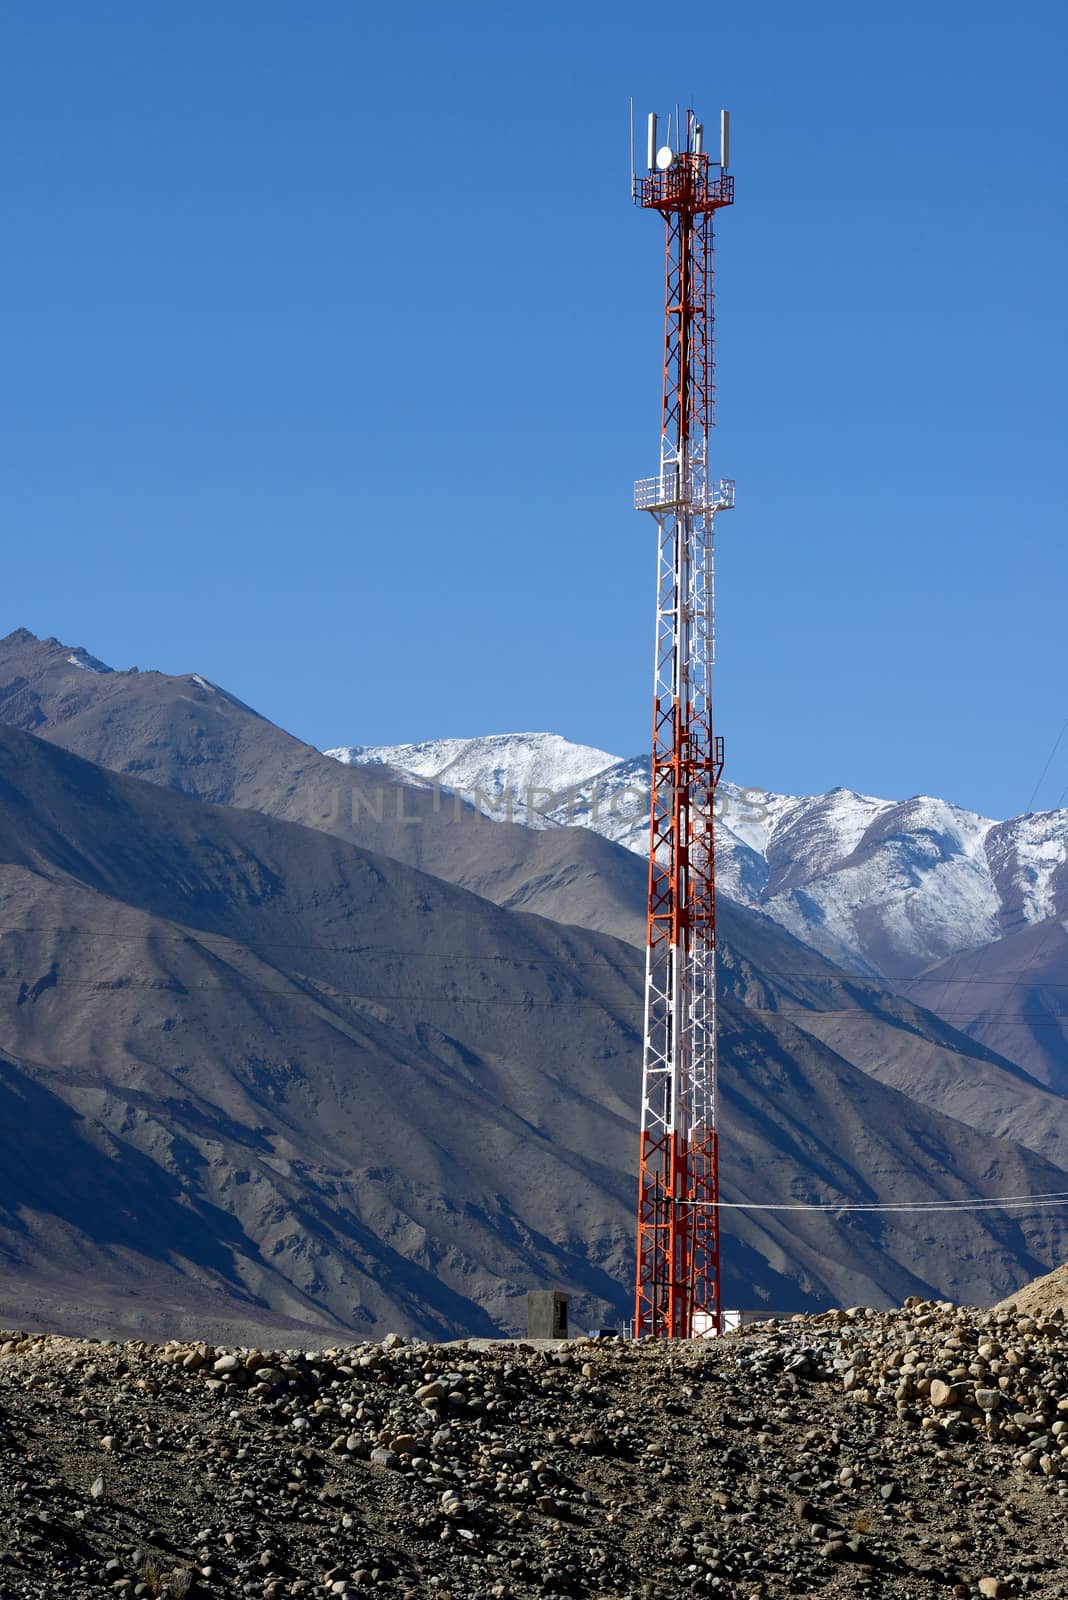 Tower of telecommunications on mountain, leh, ladakh, india by think4photop